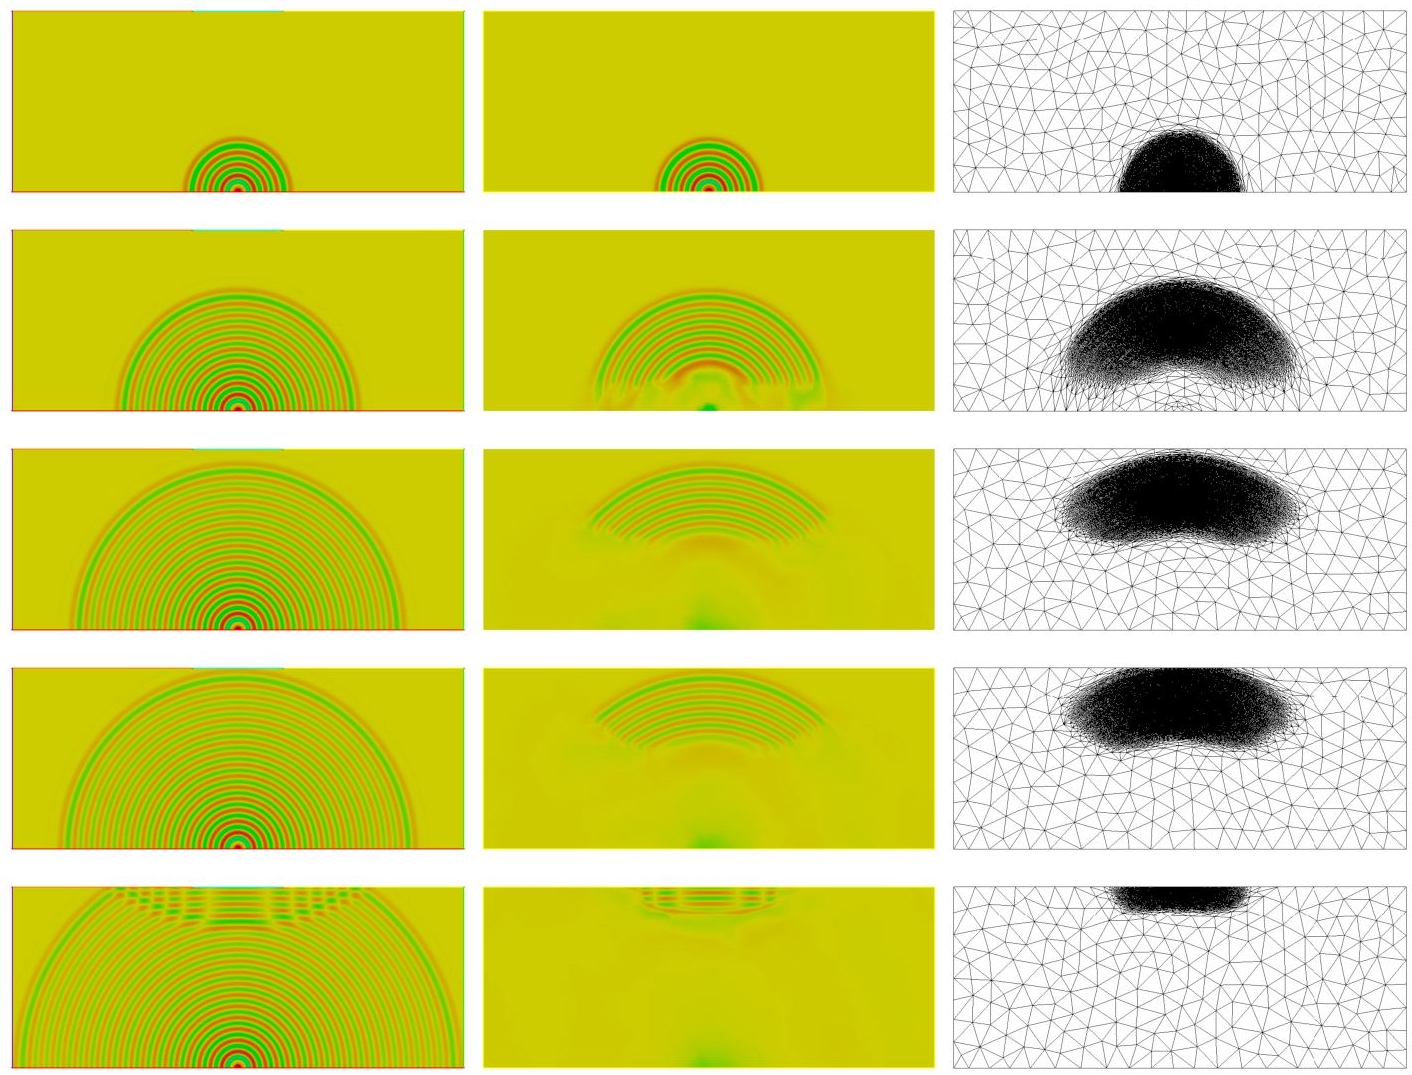 Schematic illustration of propagation of acoustic waves: density field evolving in time on a uniform mesh (left) and on adapted meshes (middle and right).